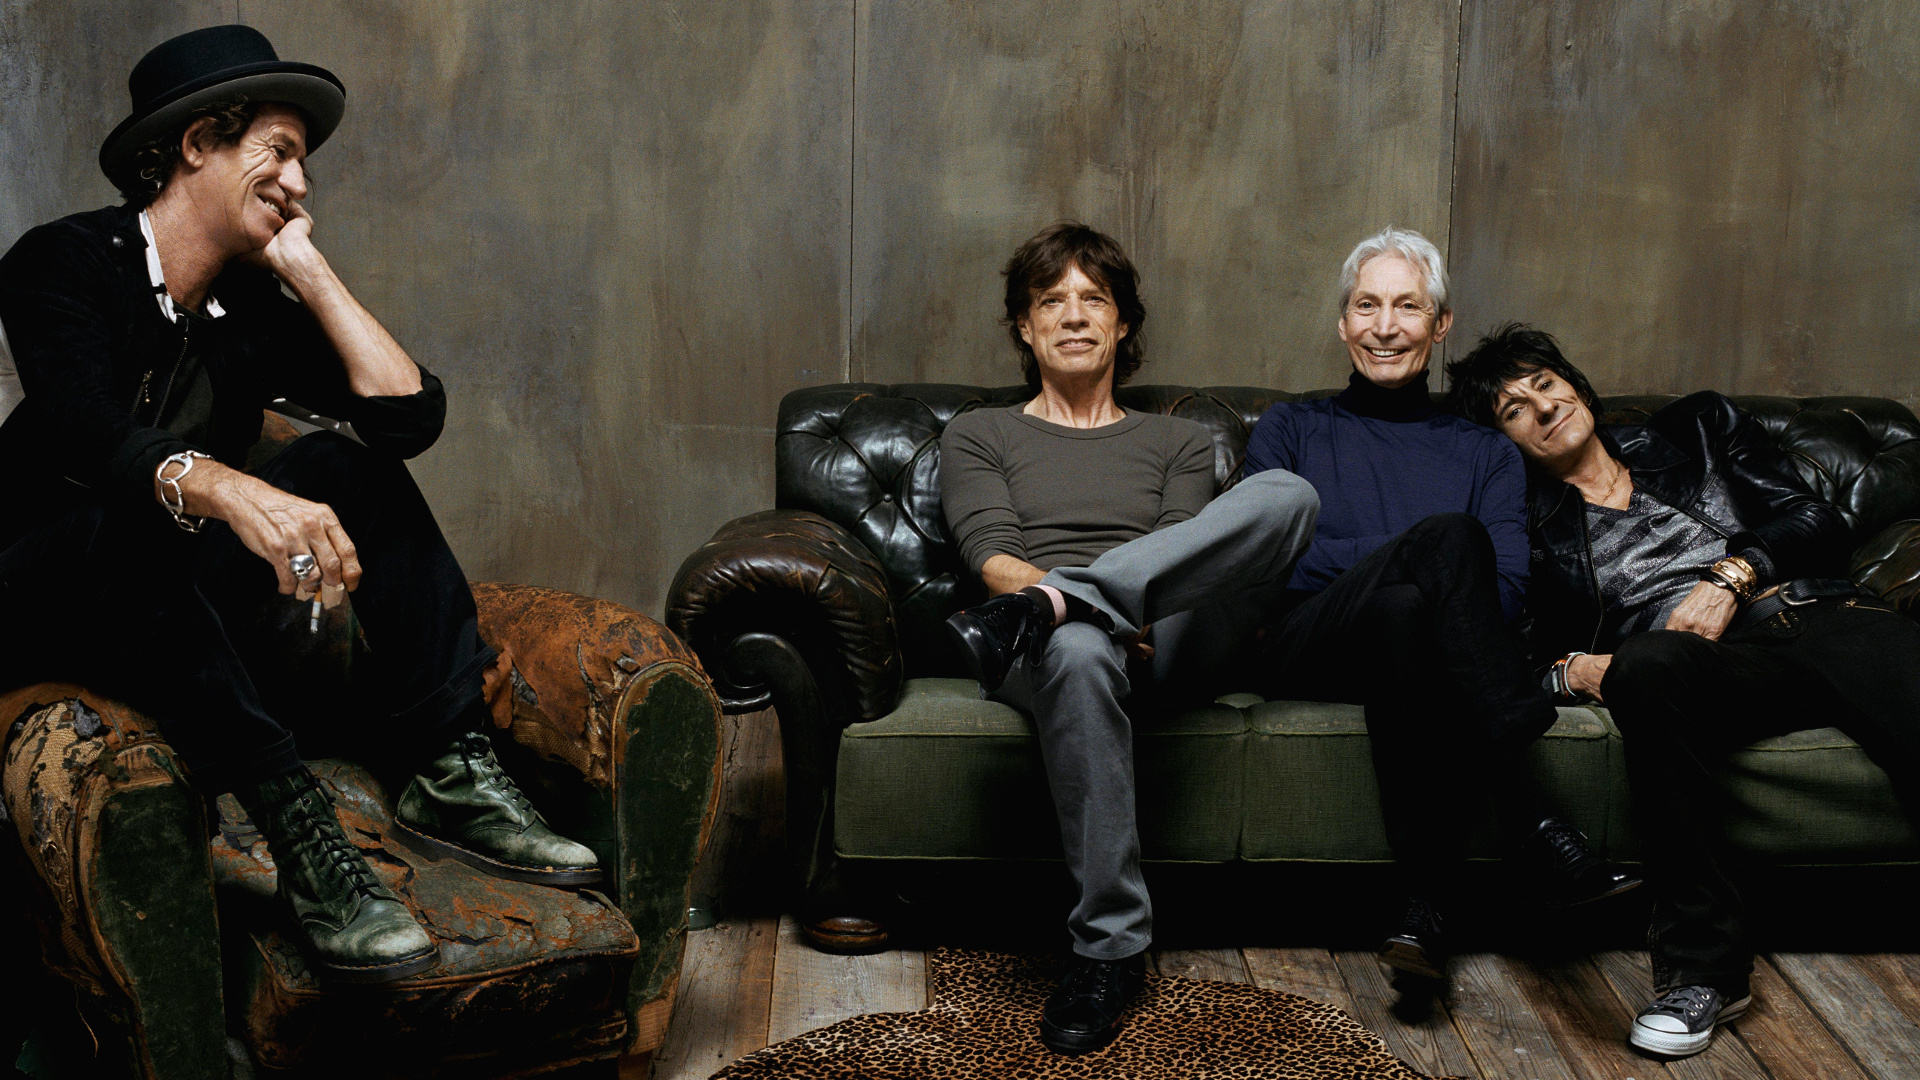 The Rolling Stones, Band photos, Early days, Rock music pioneers, 1920x1080 Full HD Desktop